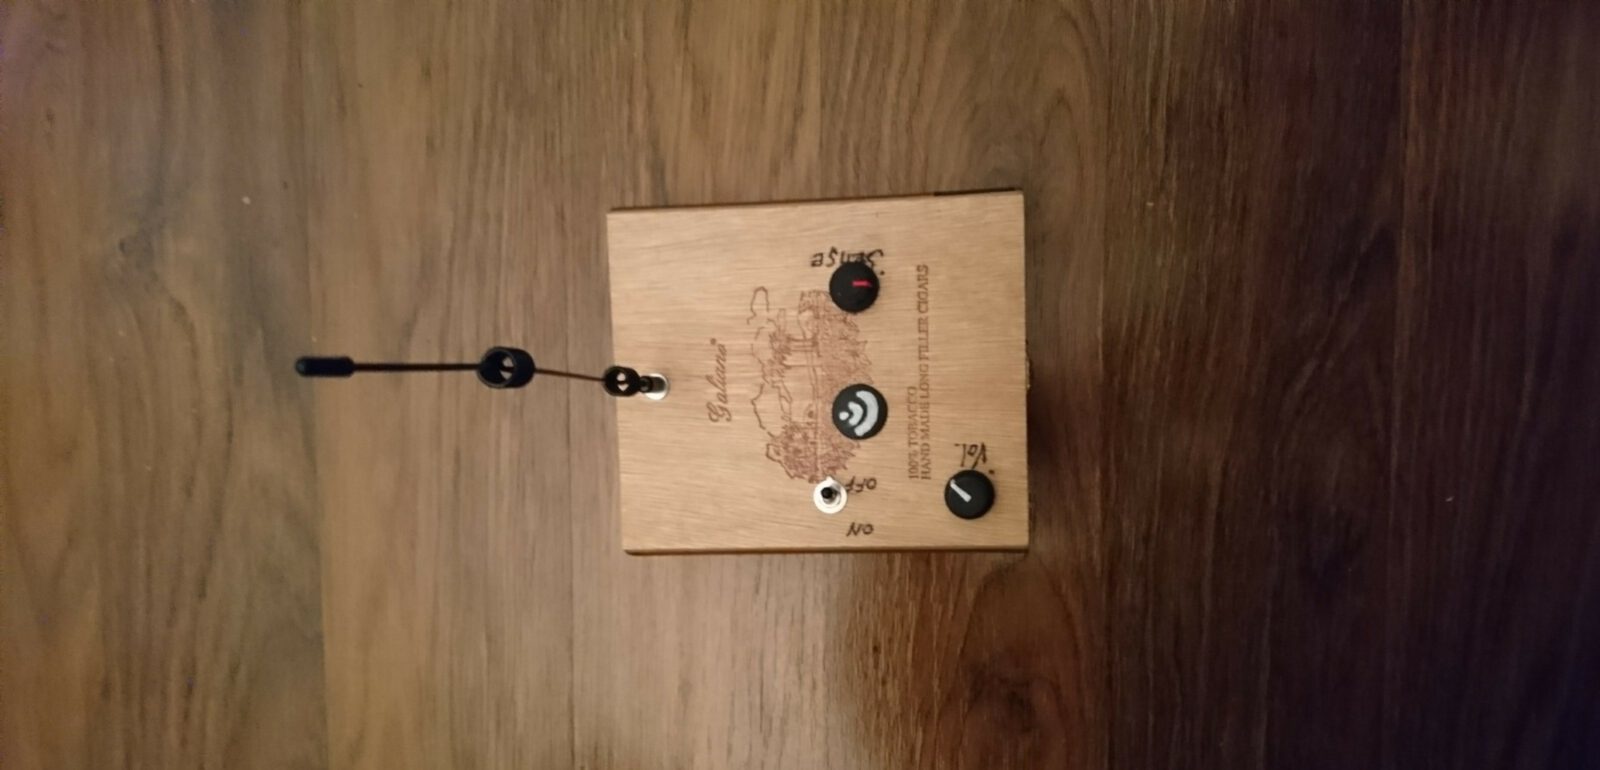 Pocket Cyber Theremin Version 4.0